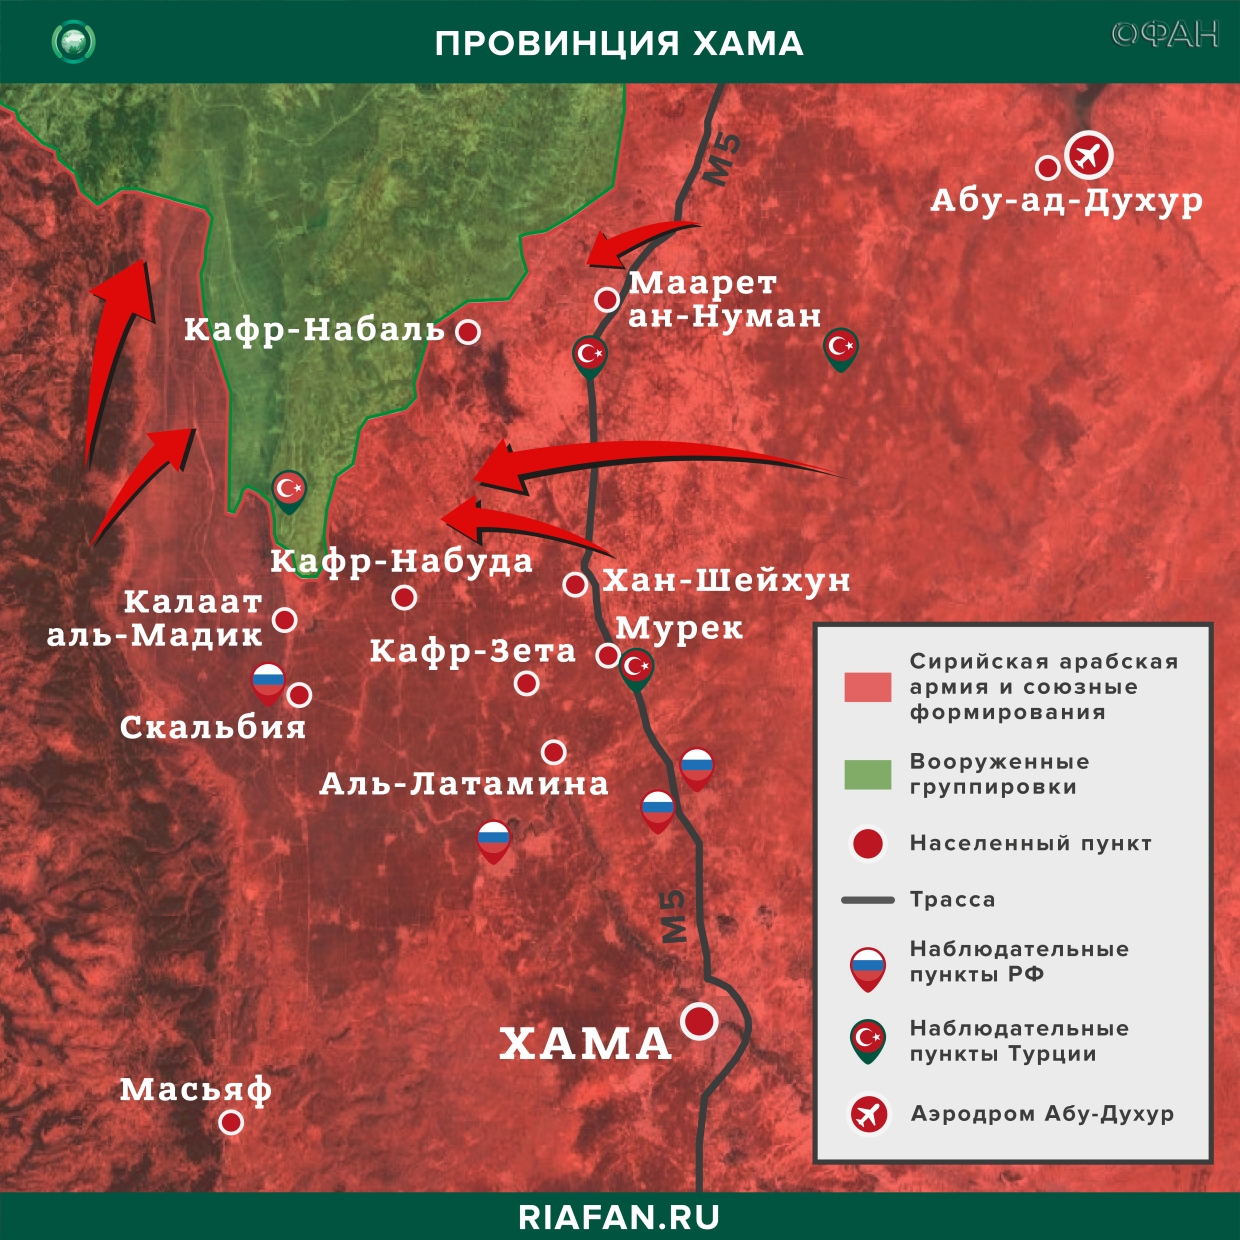 Syria the results of the day on 3 Martha 06.00: Syrian army liberated Serakib, Turkish drone airstrike struck the airport Hama